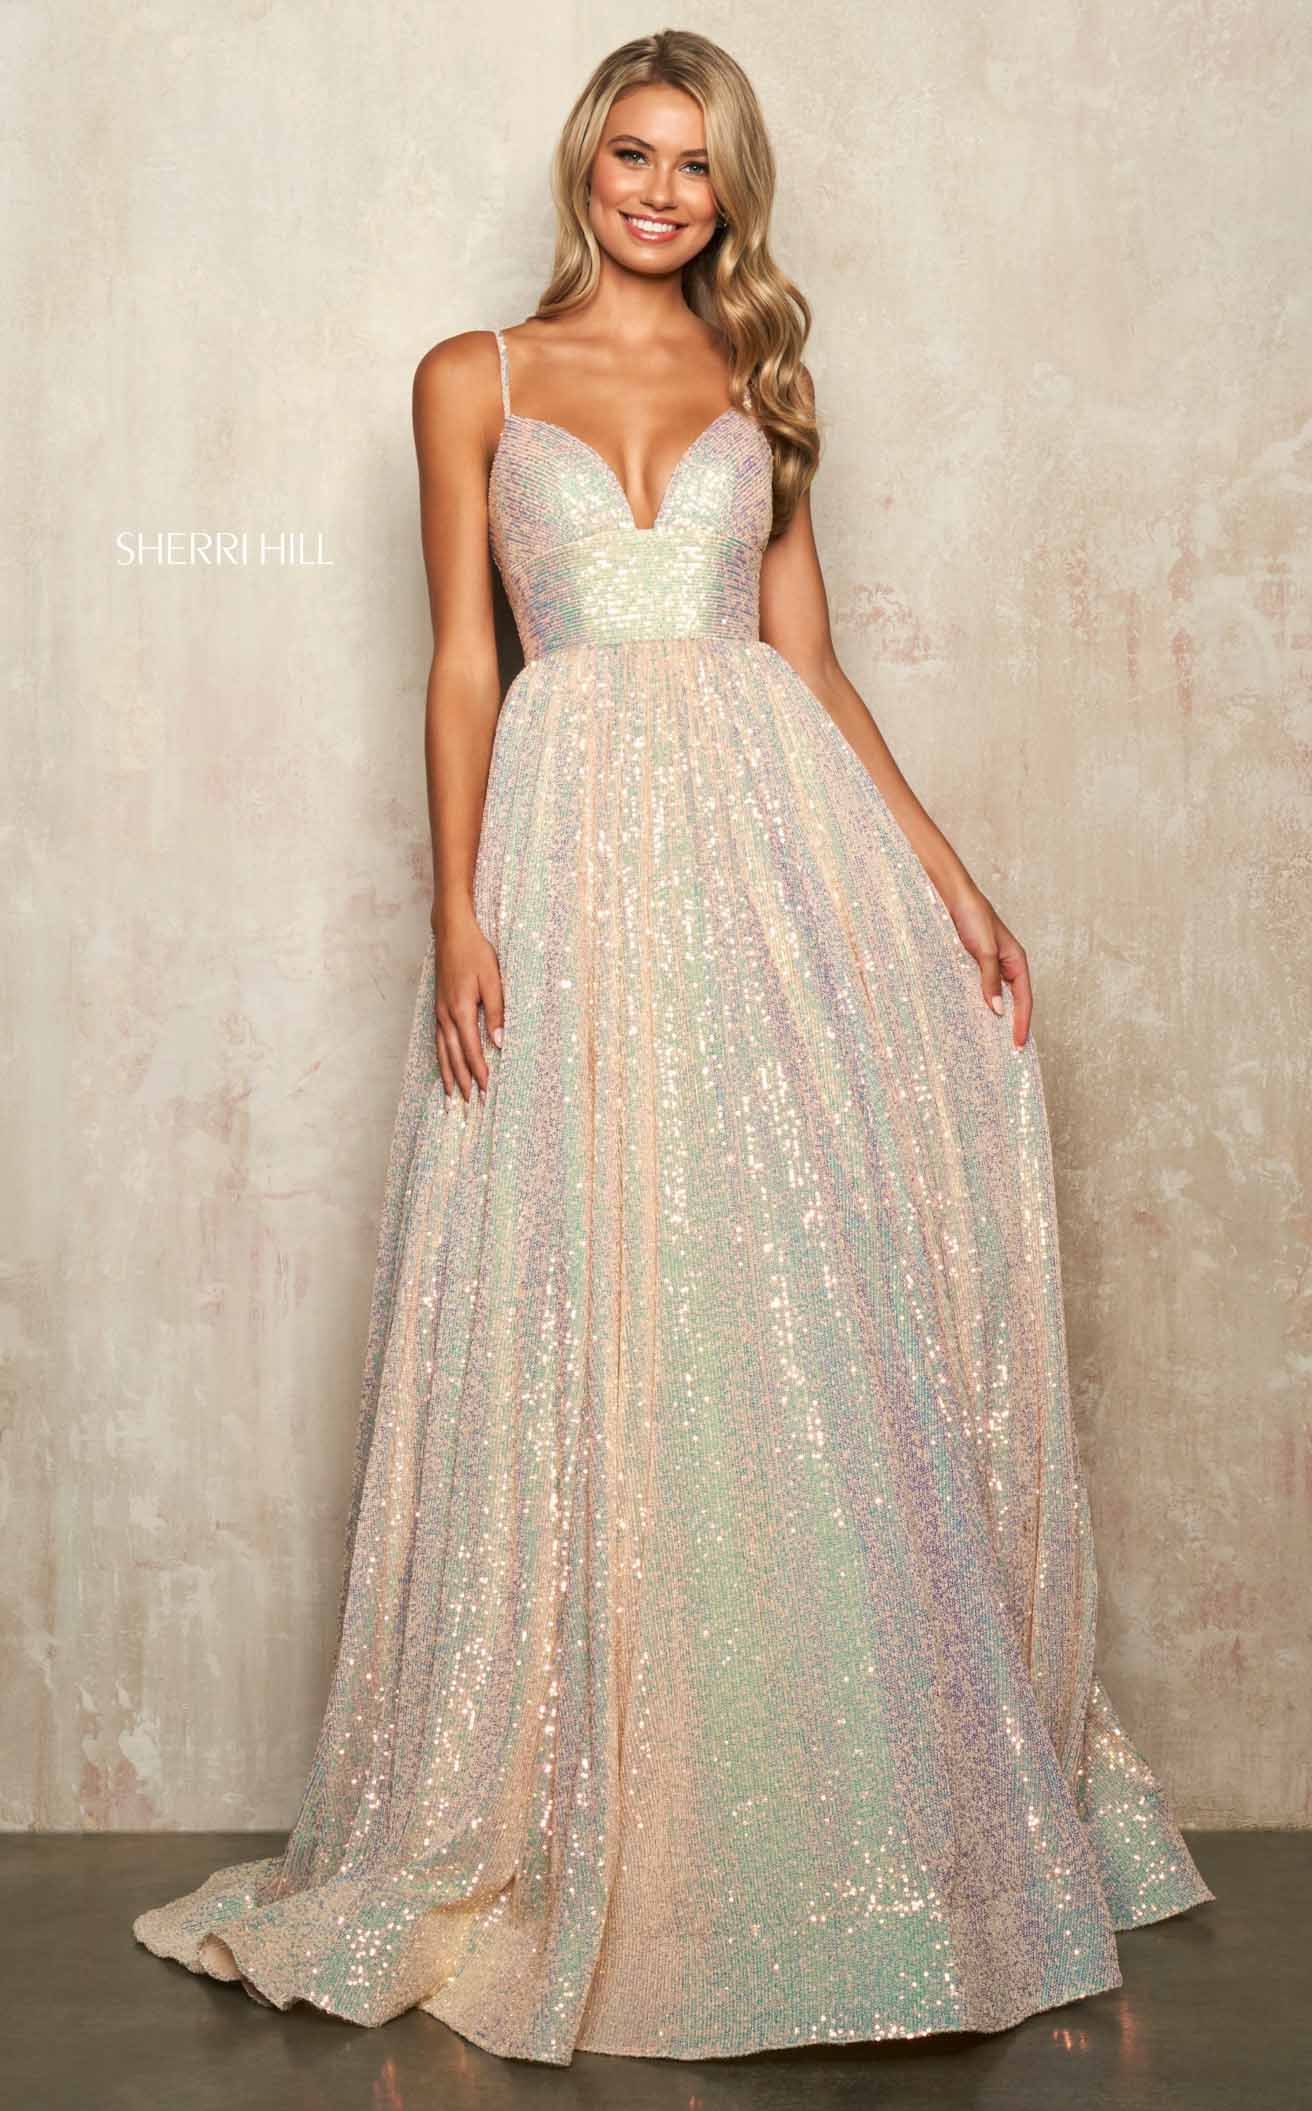 how much are sherri hill dresses